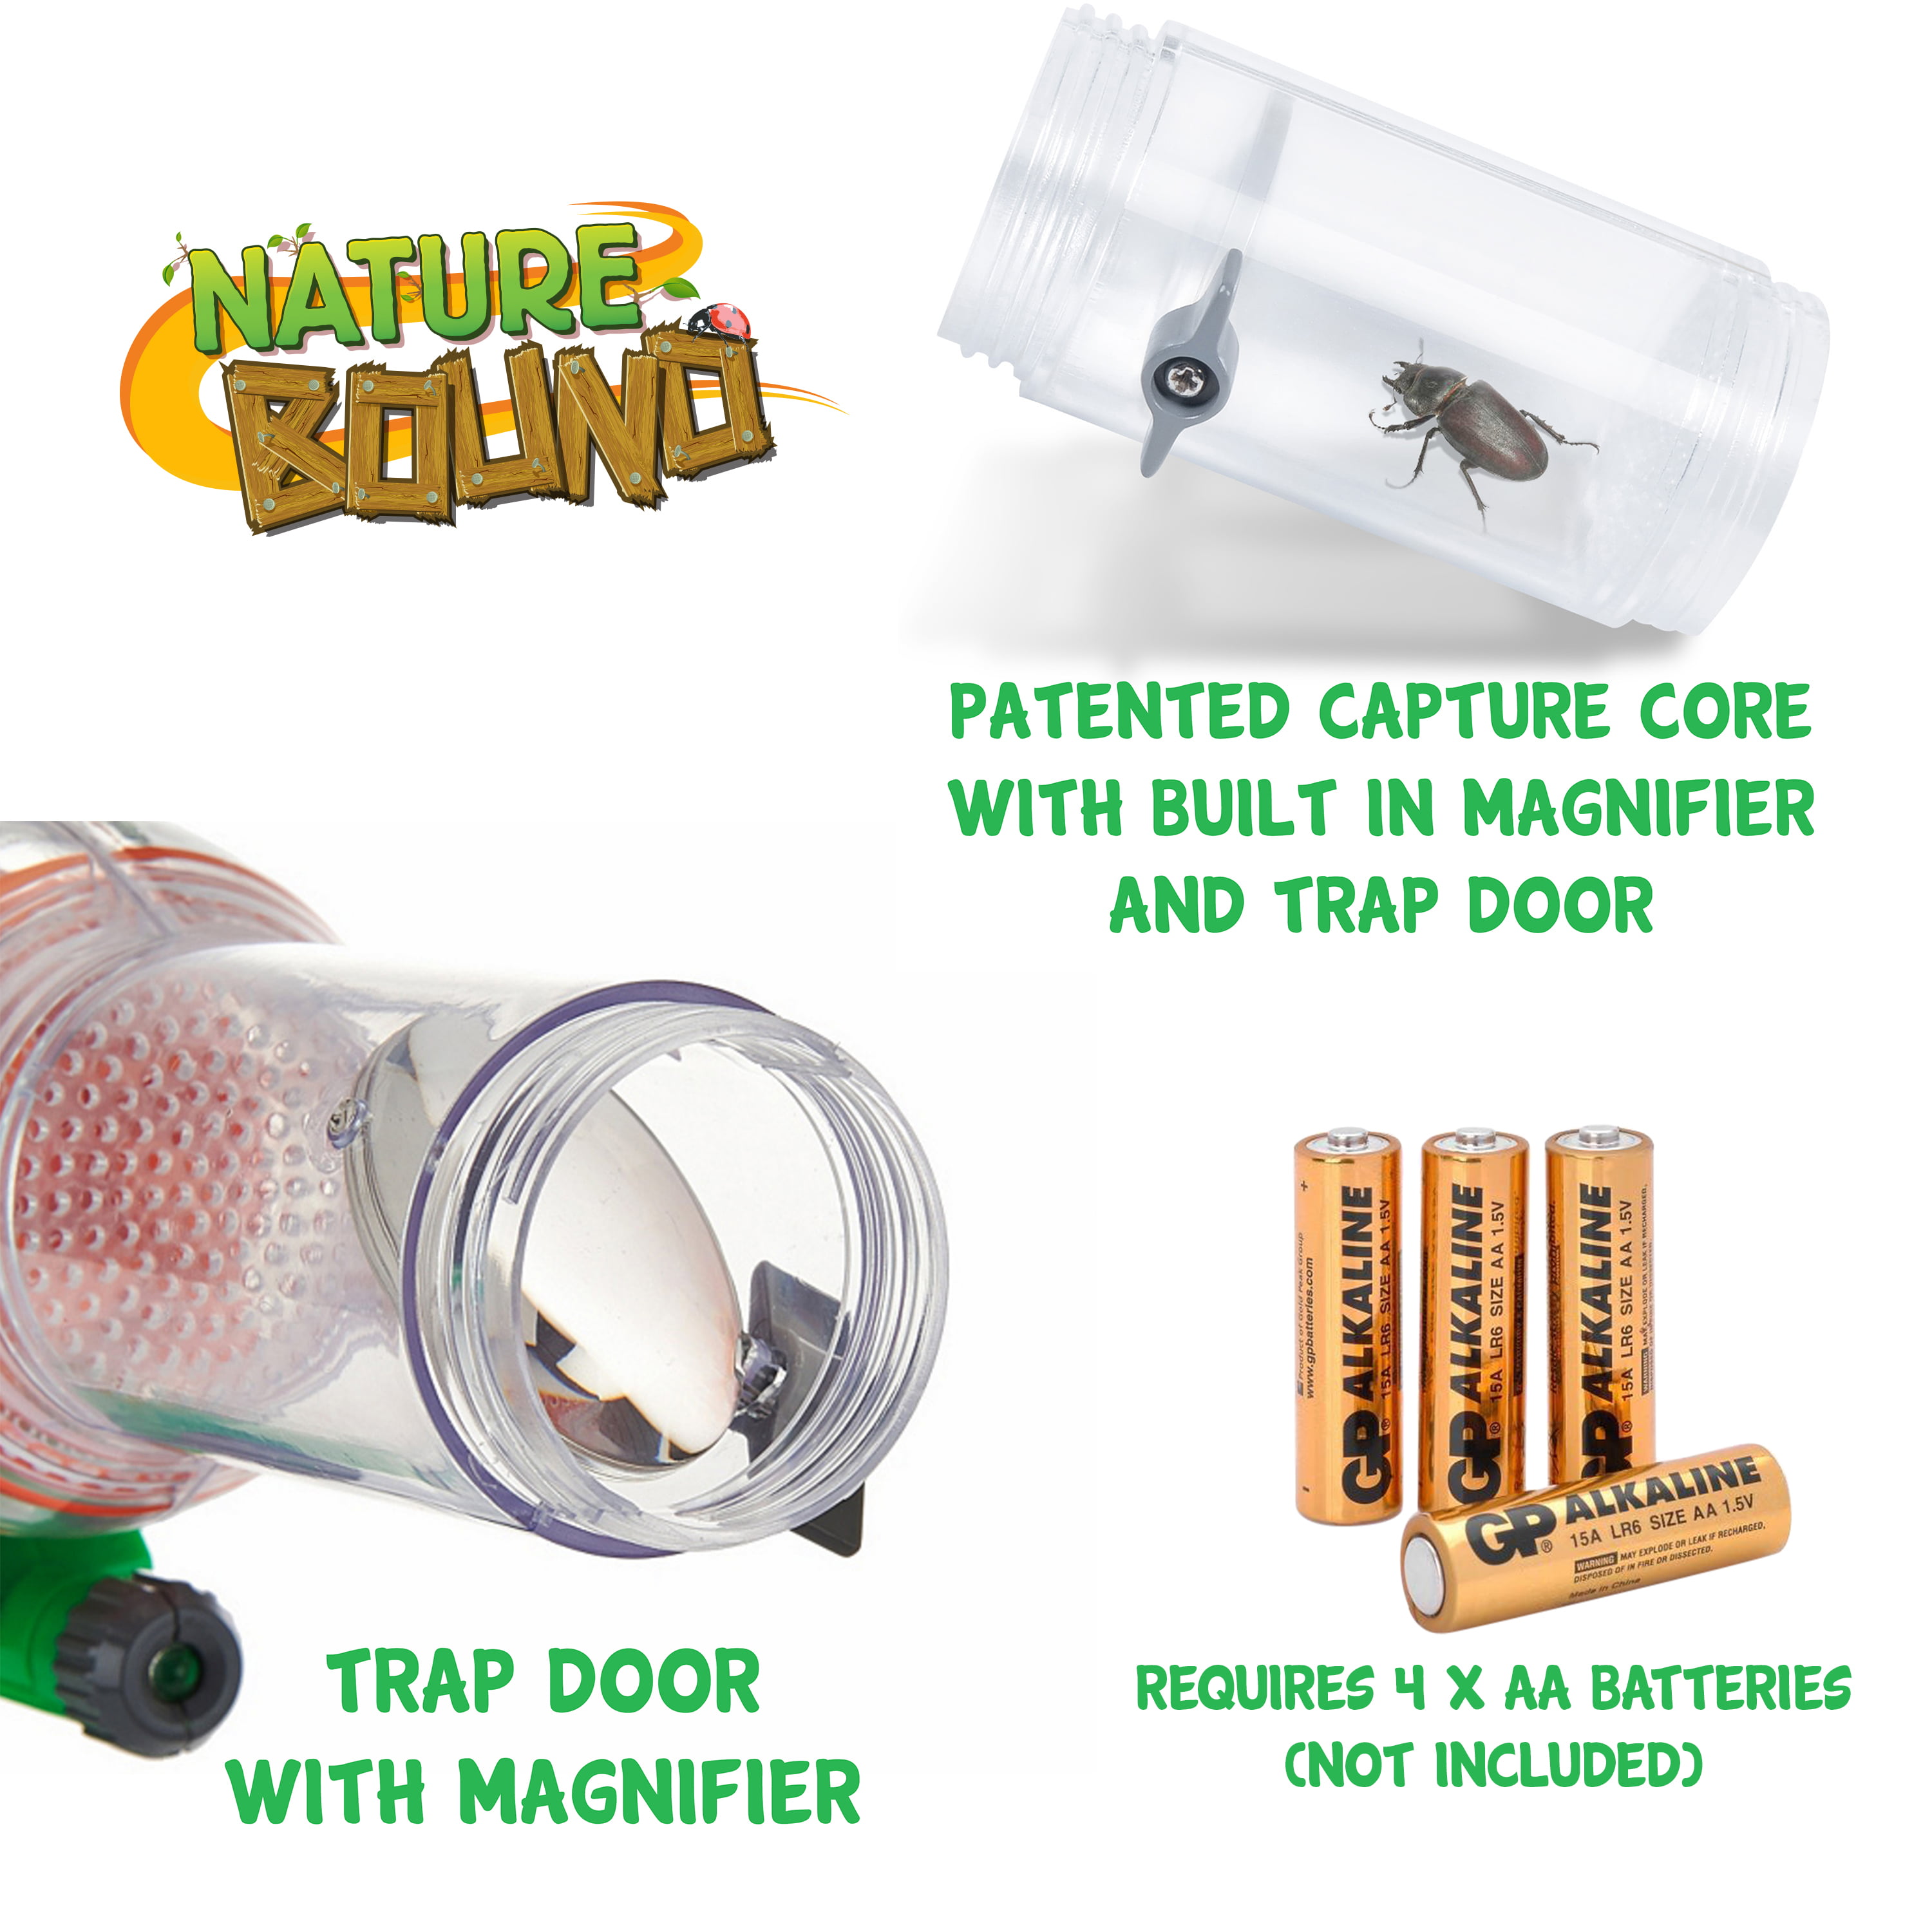 Eco-Friendly Bug Vacuum Catch and Release Indo... Nature Bound Bug Catcher Toy 